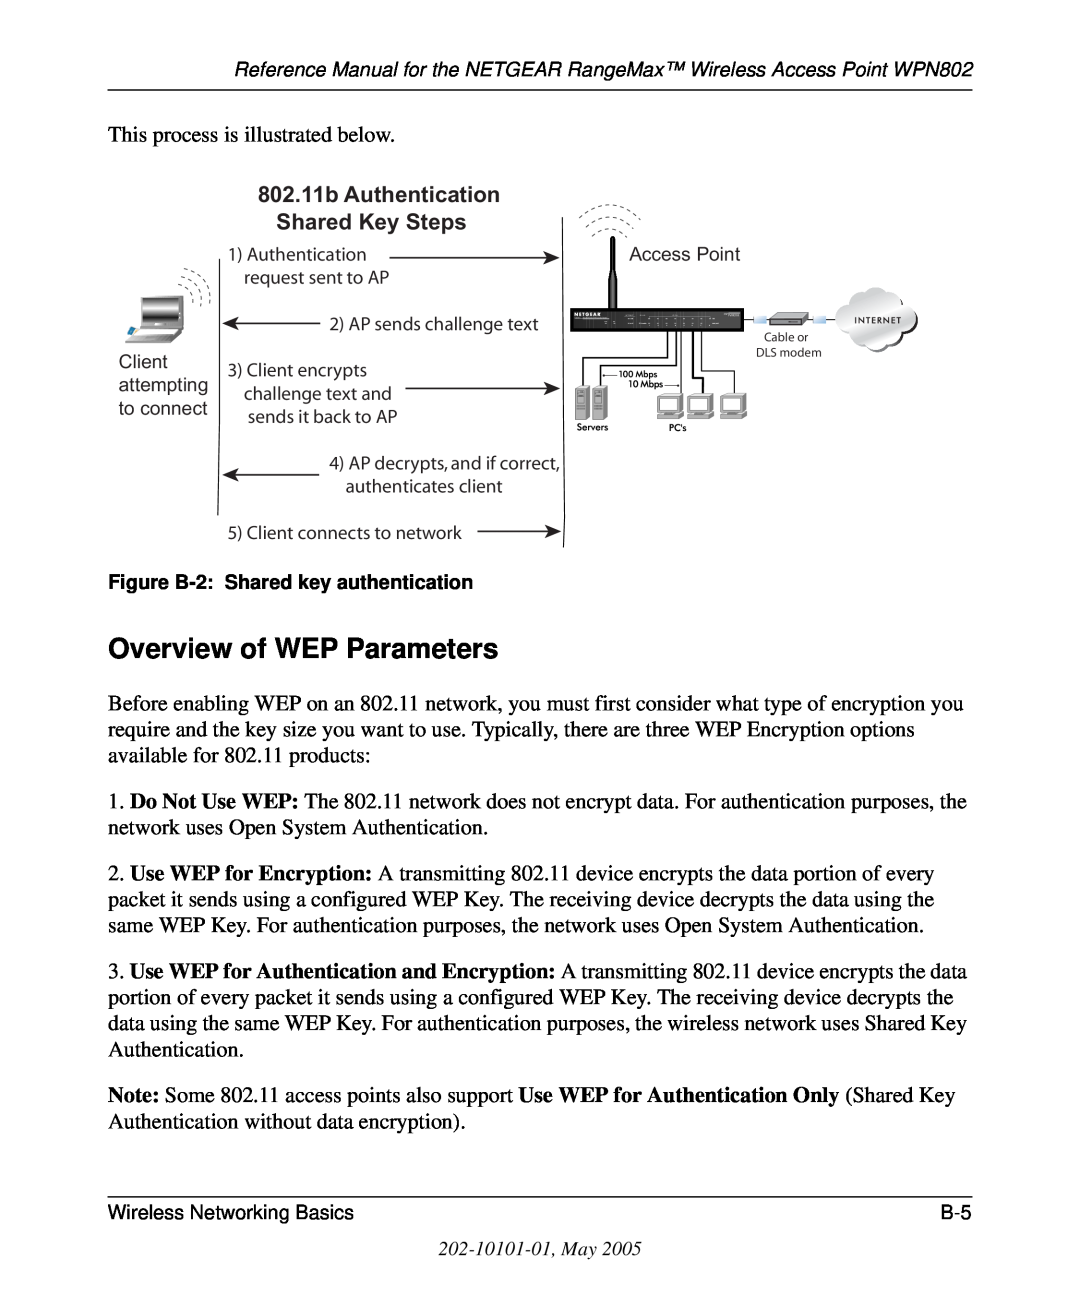 NETGEAR WPN802 manual 802.11b Authentication Shared Key Steps, Do Not Use WEP The network uses Open System 